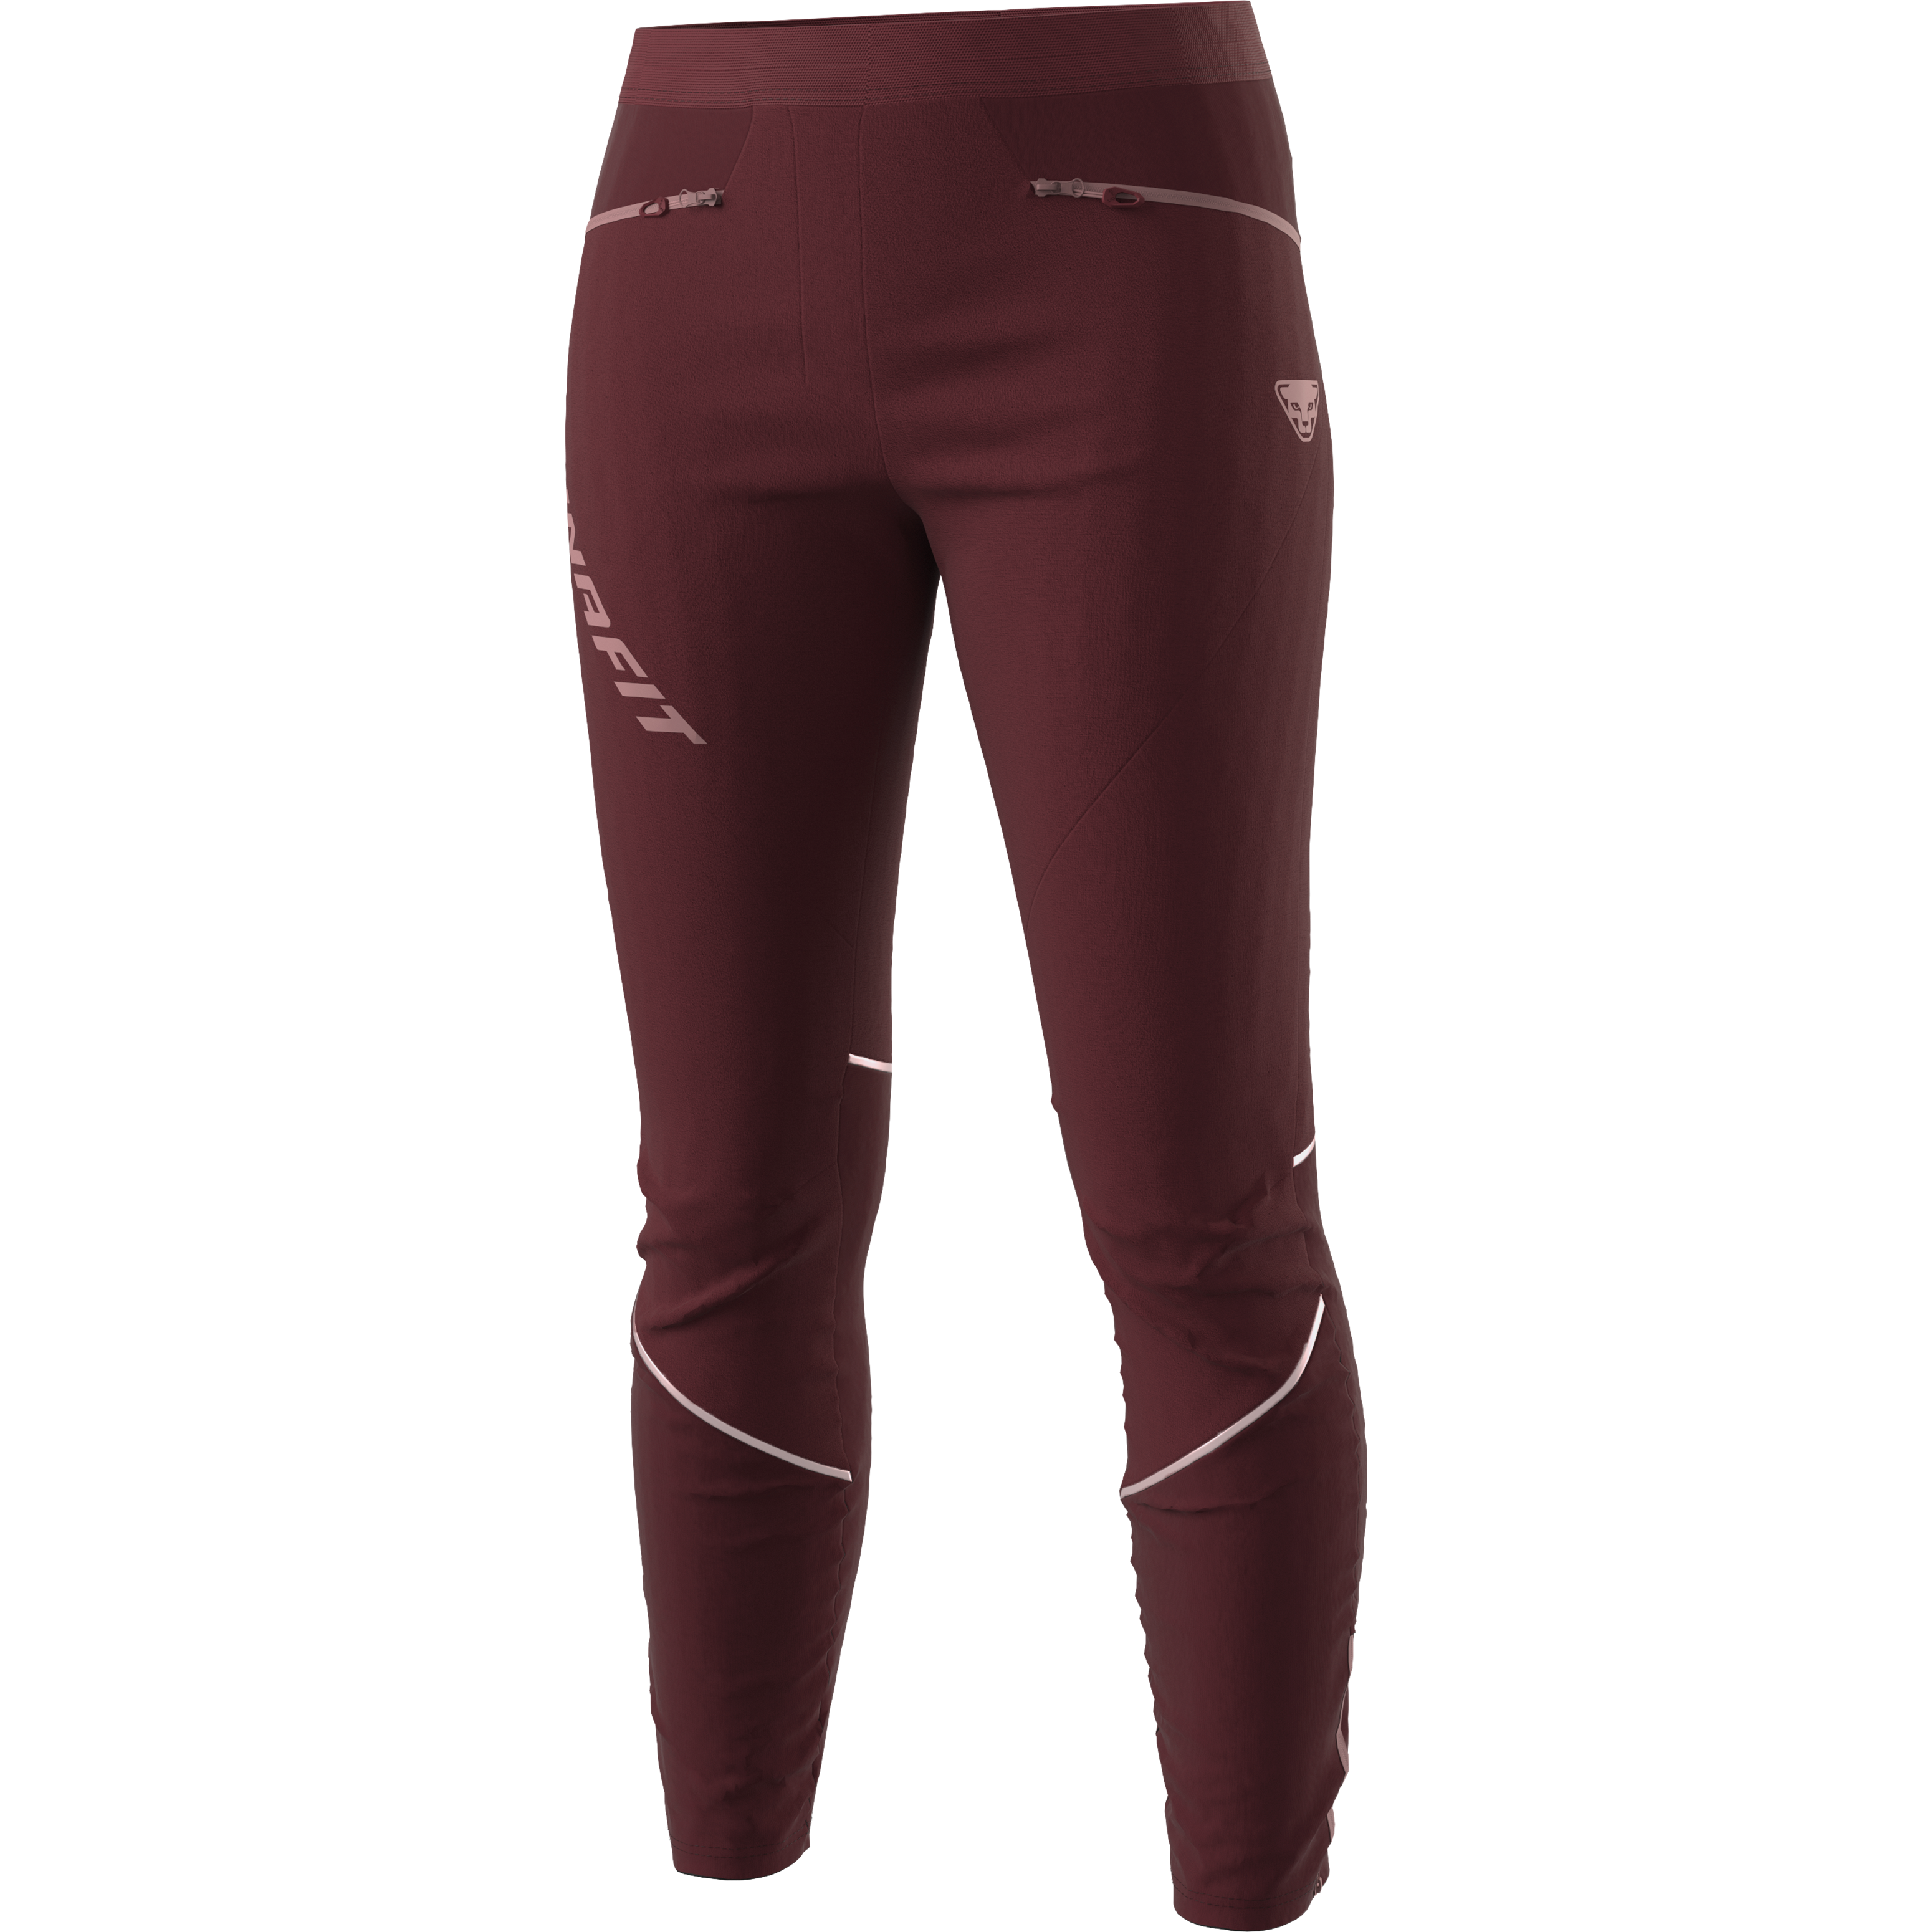 Buy Winter Cotton Wear Fleece Red Track pants/Lowers for Women online at  best Prices by Cupidclothings – Cupid Clothings